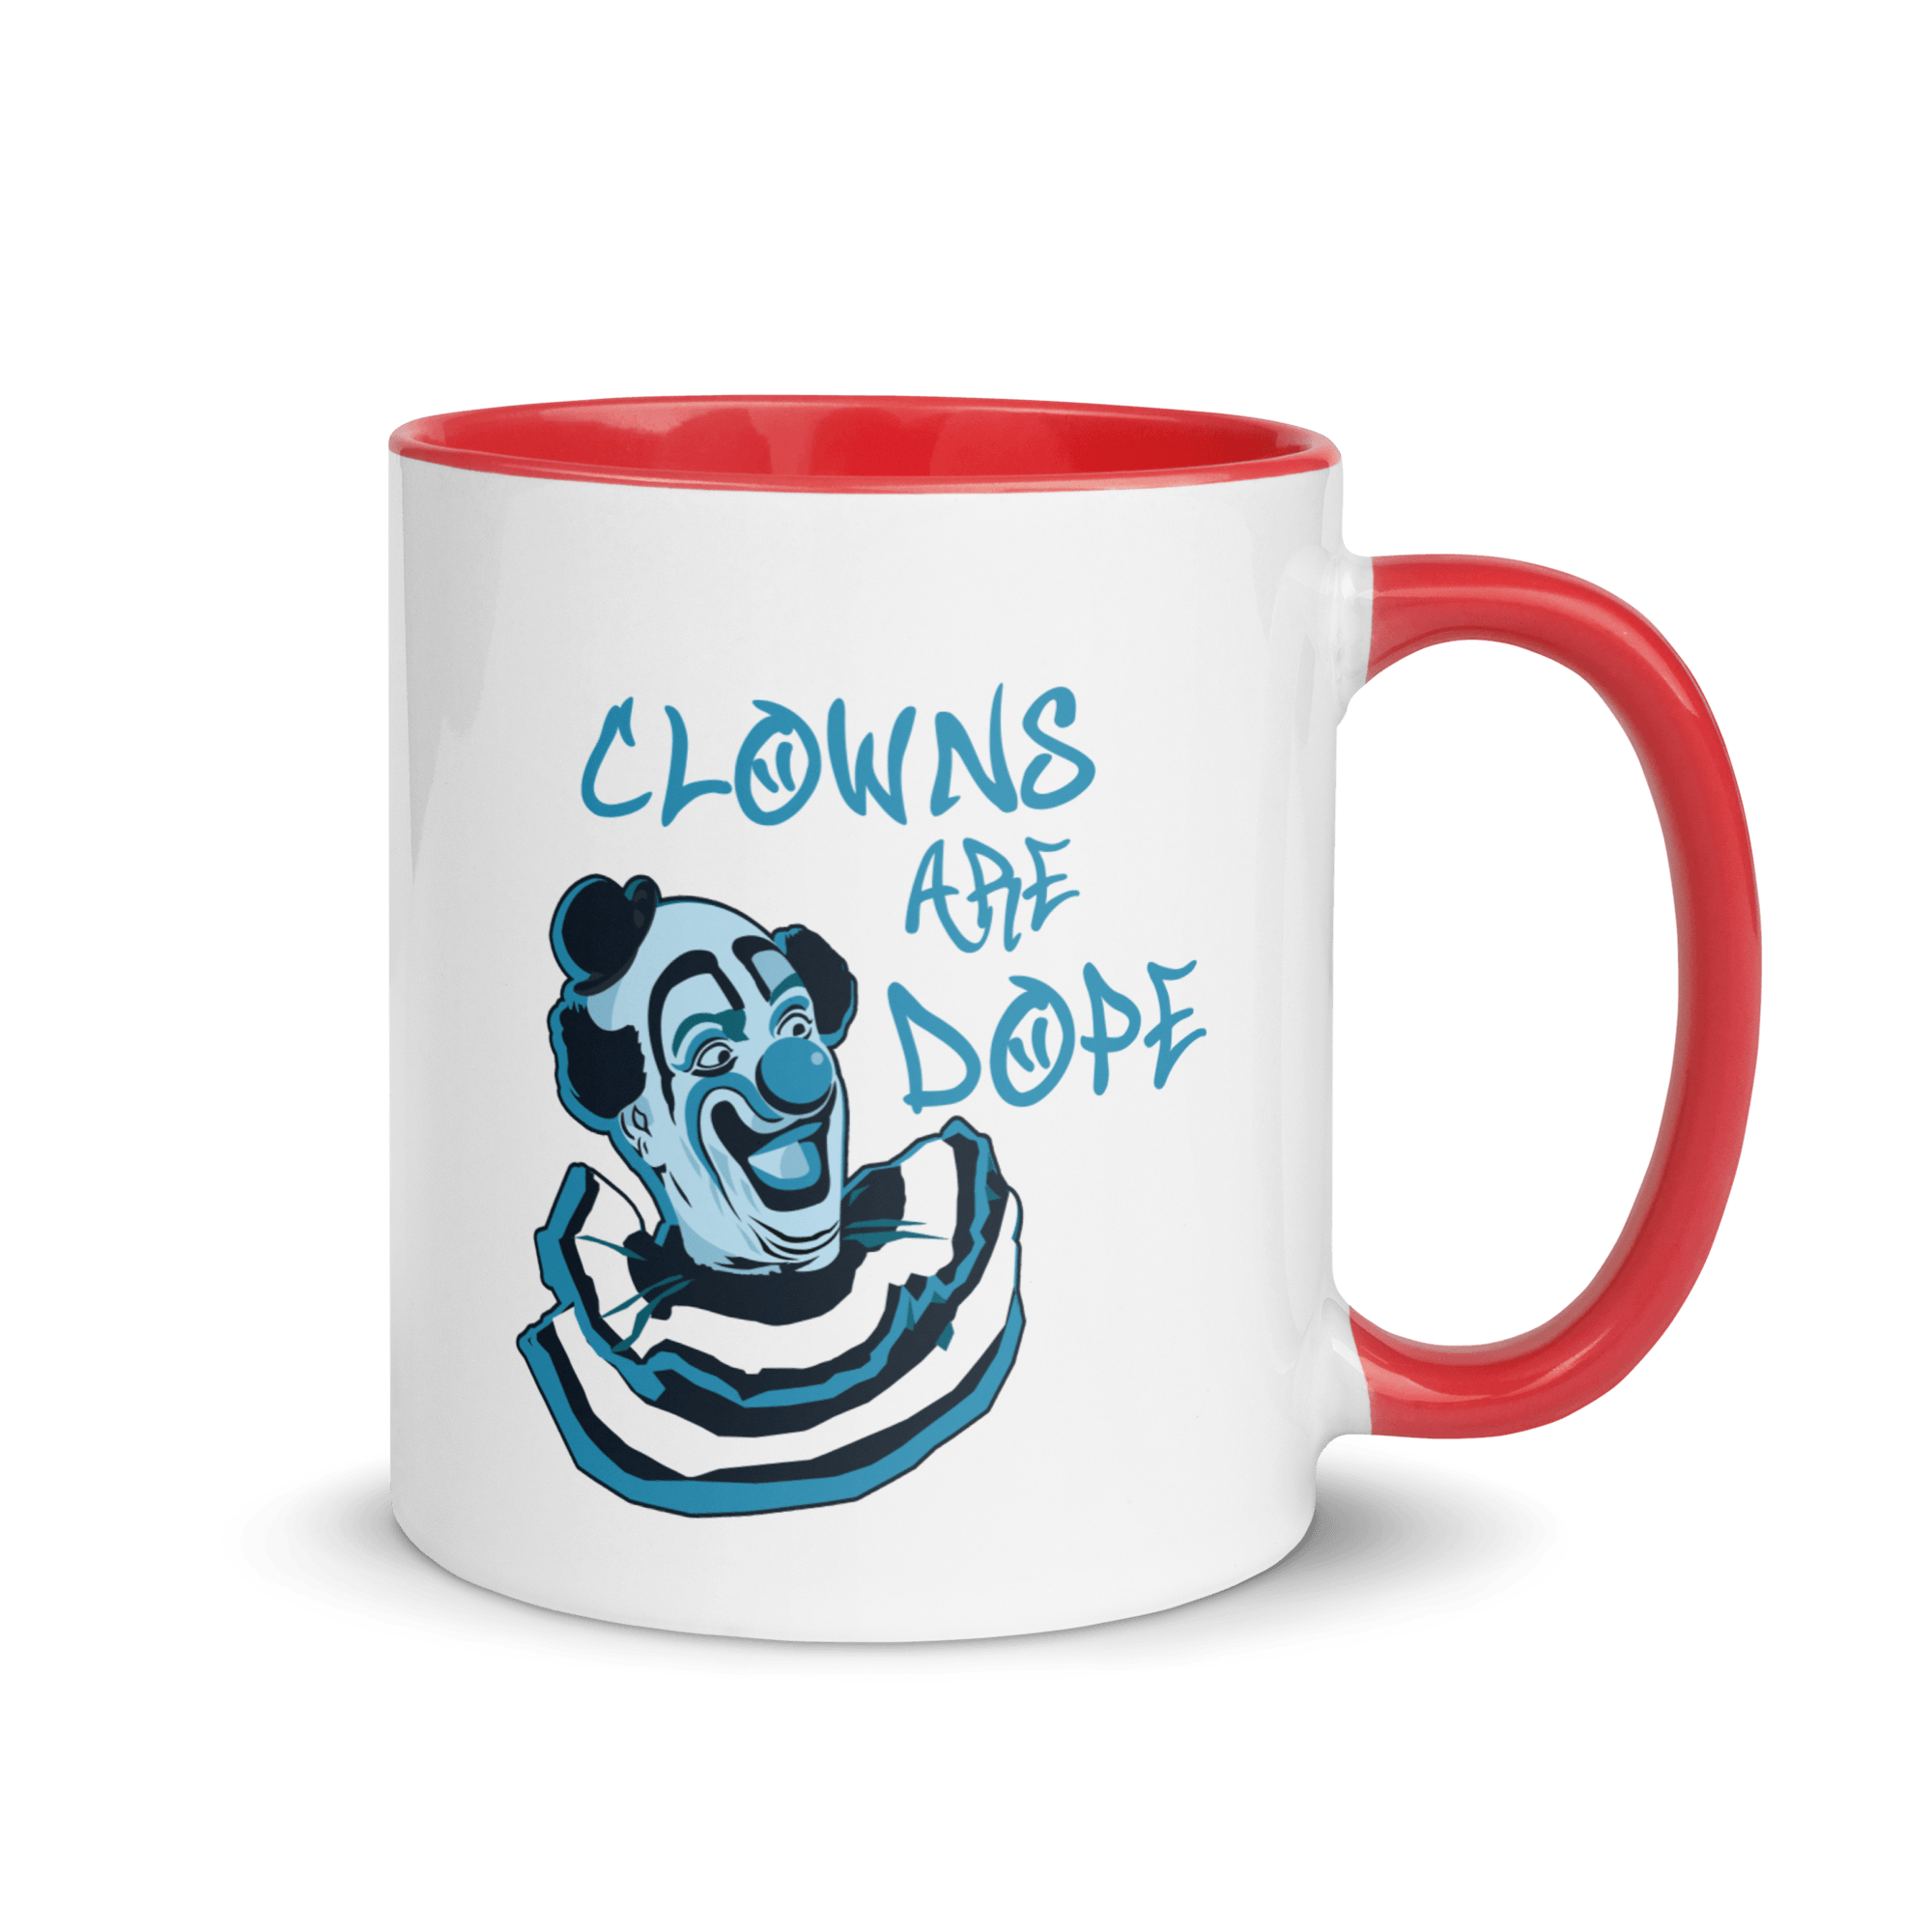 Clowns Are Dope Mug with Color Inside